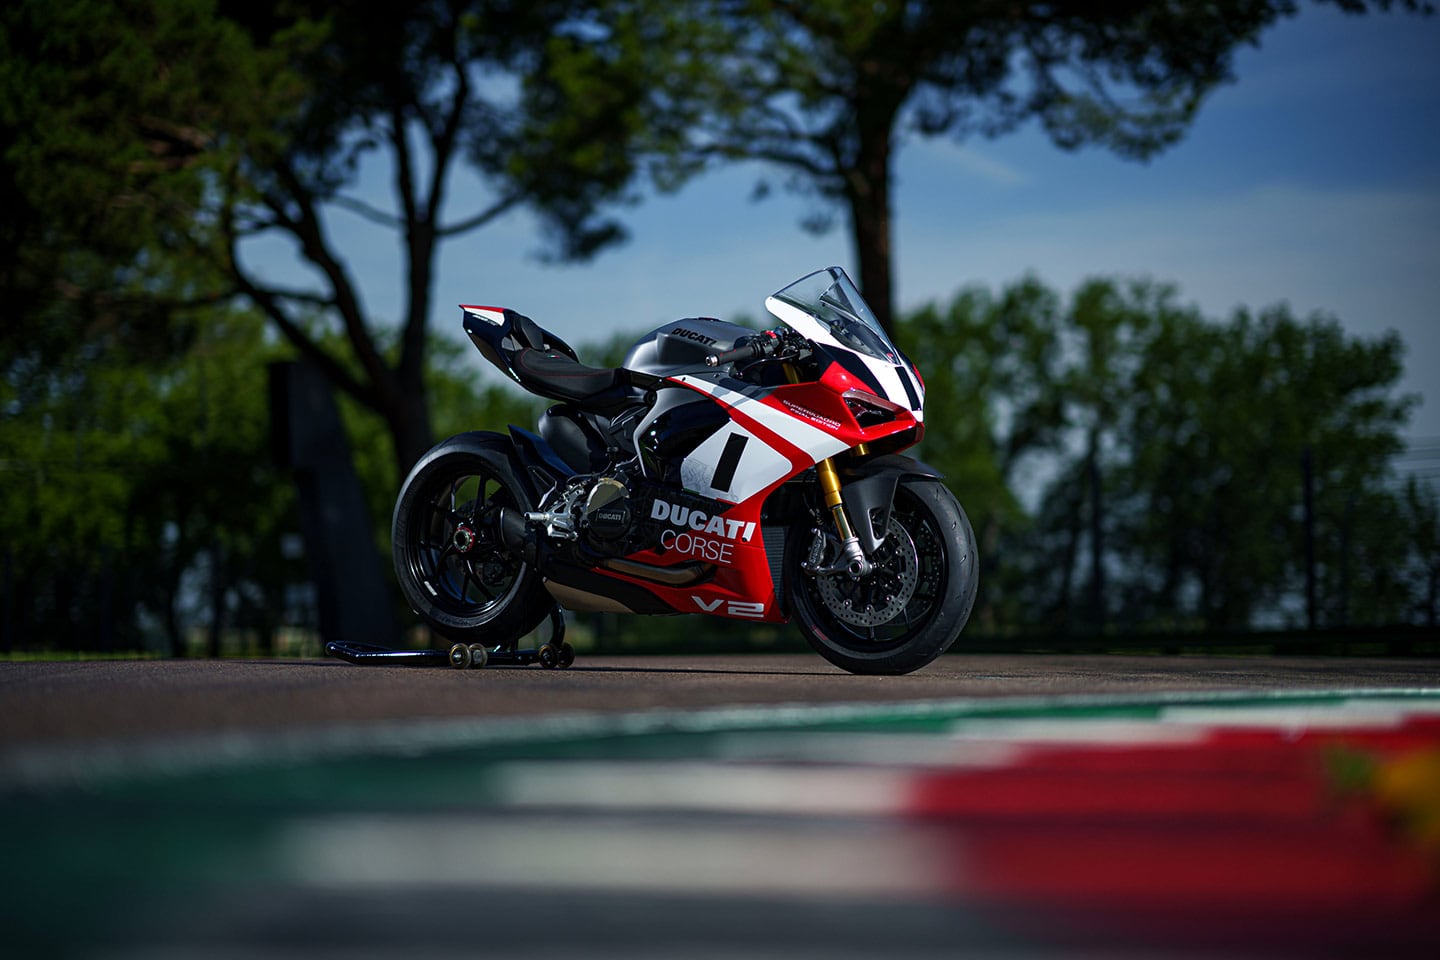 The 2025 Ducati Panigale V2 Superquadro Final Edition will come with a long list of exclusive features.